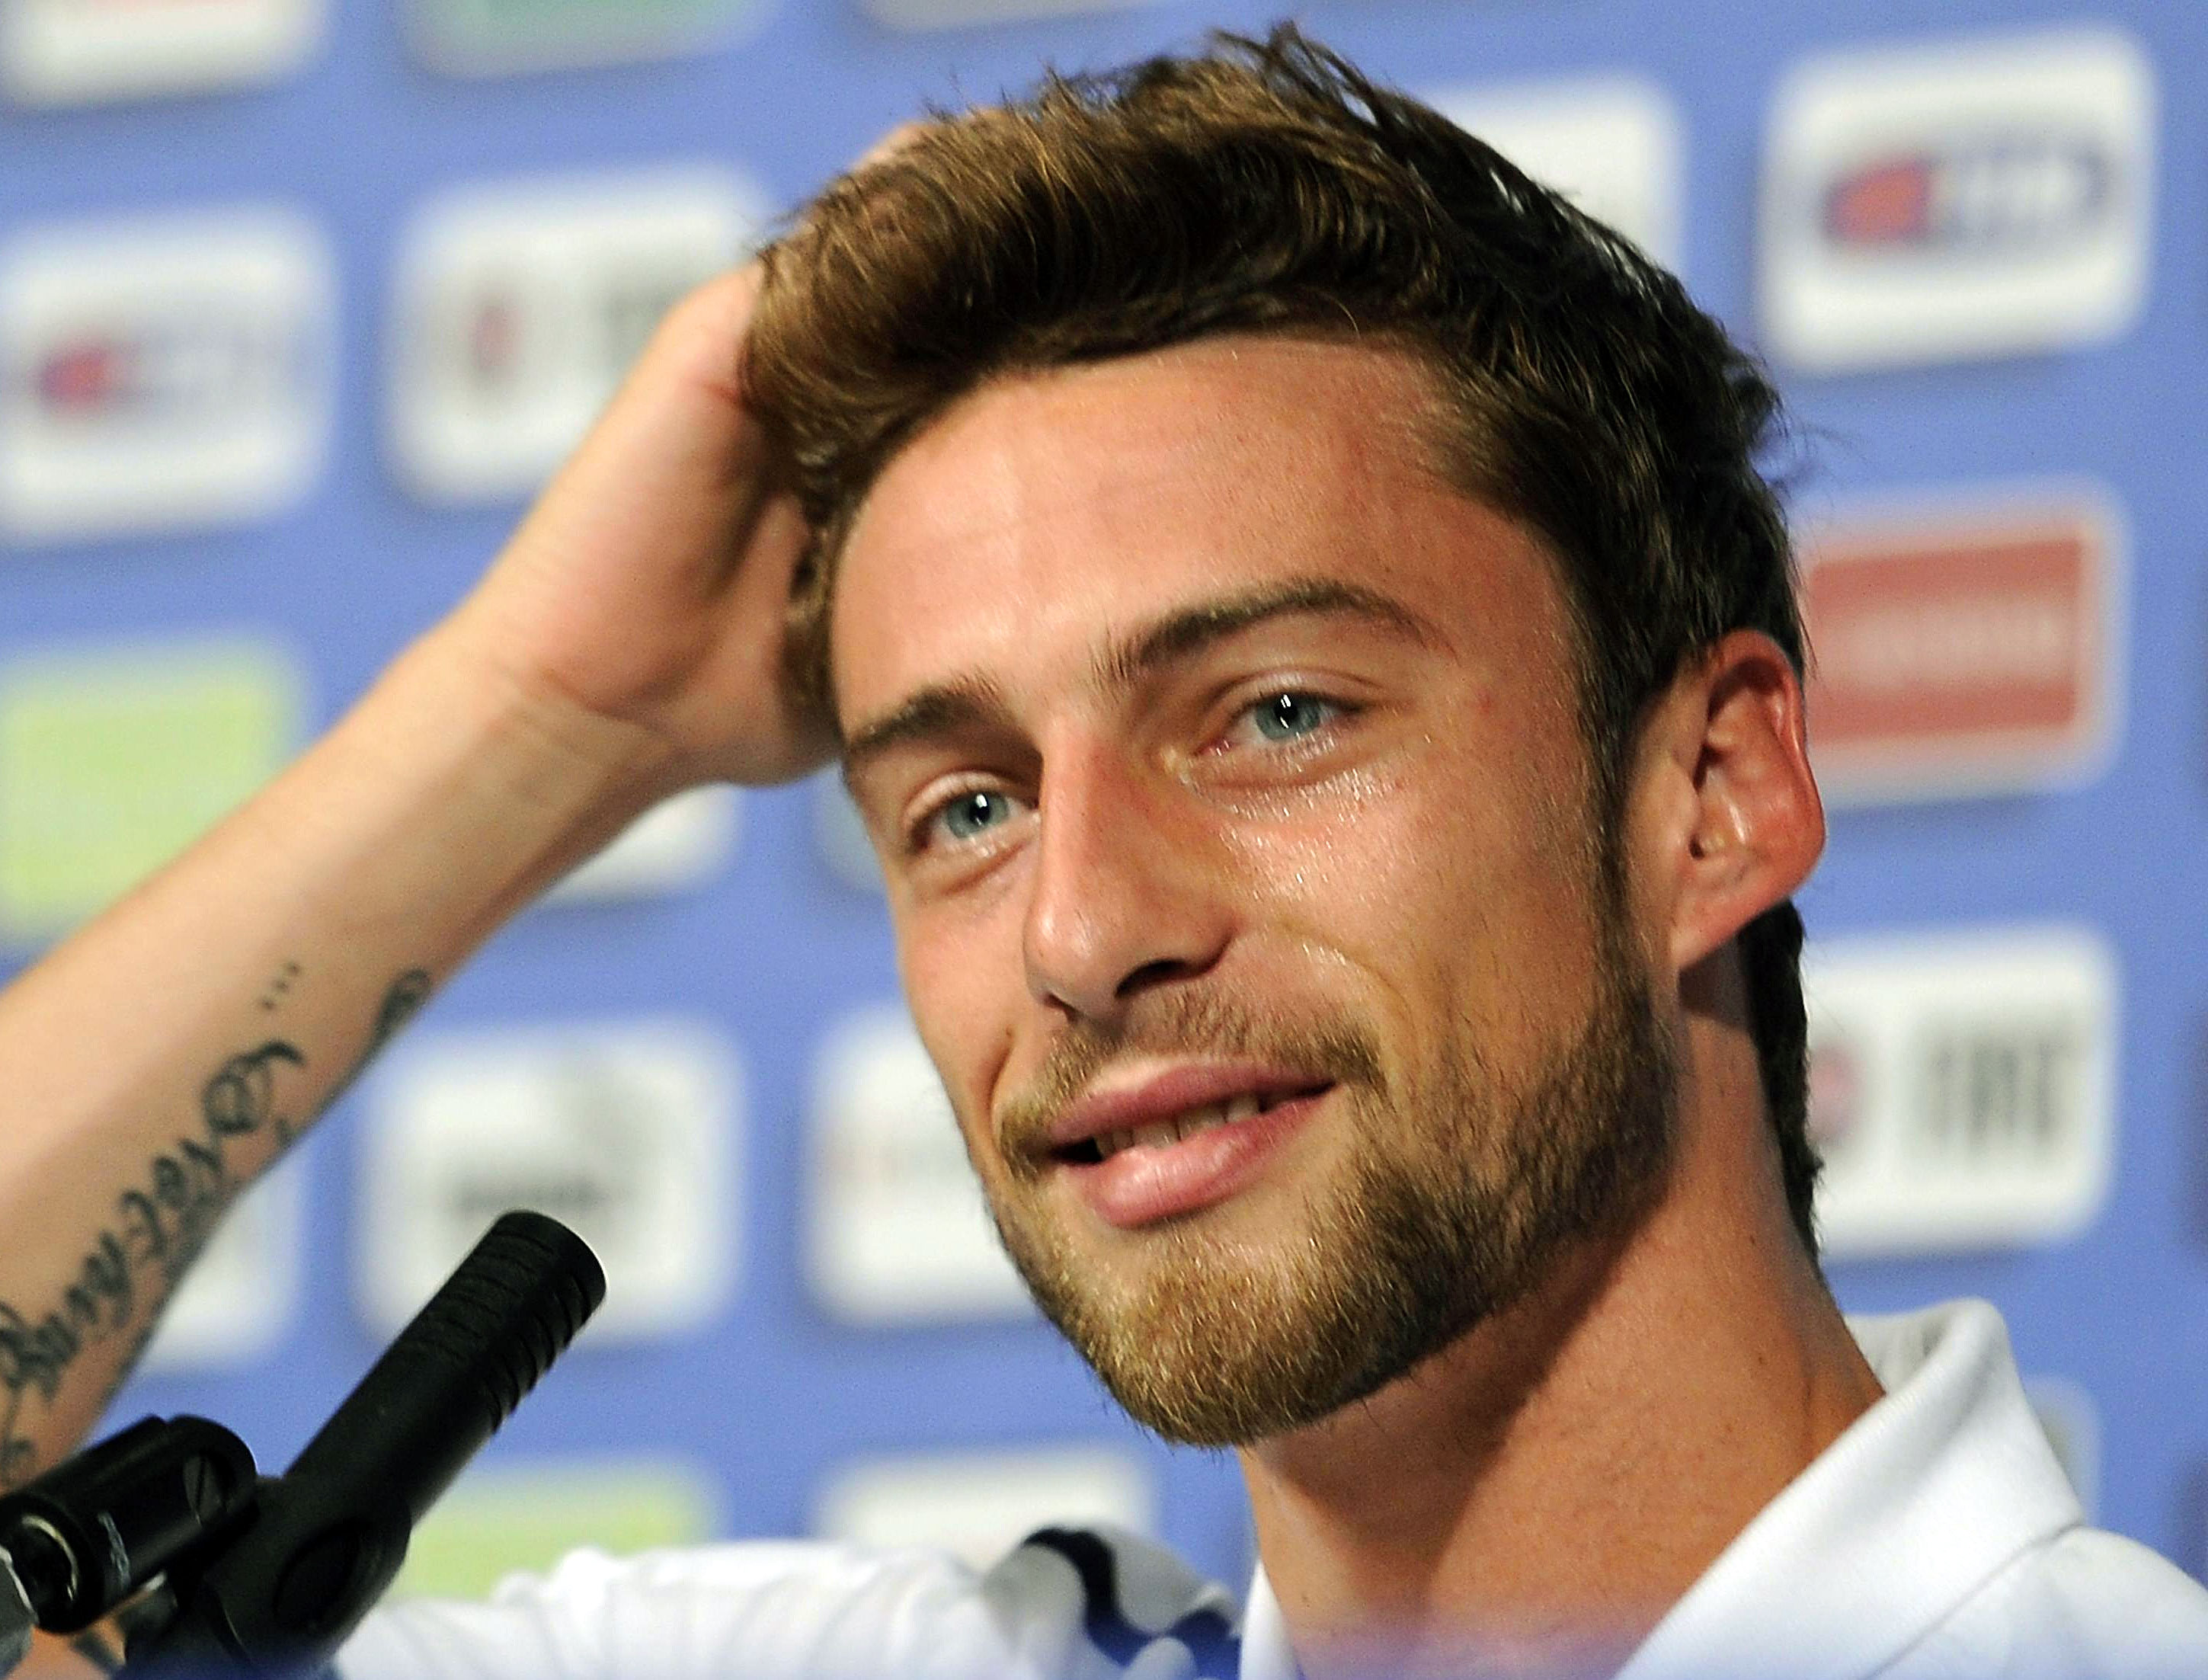 Marchisio: “Napoli Have Grown, Roma Have Proved Their Character & Inter Need Consistency”